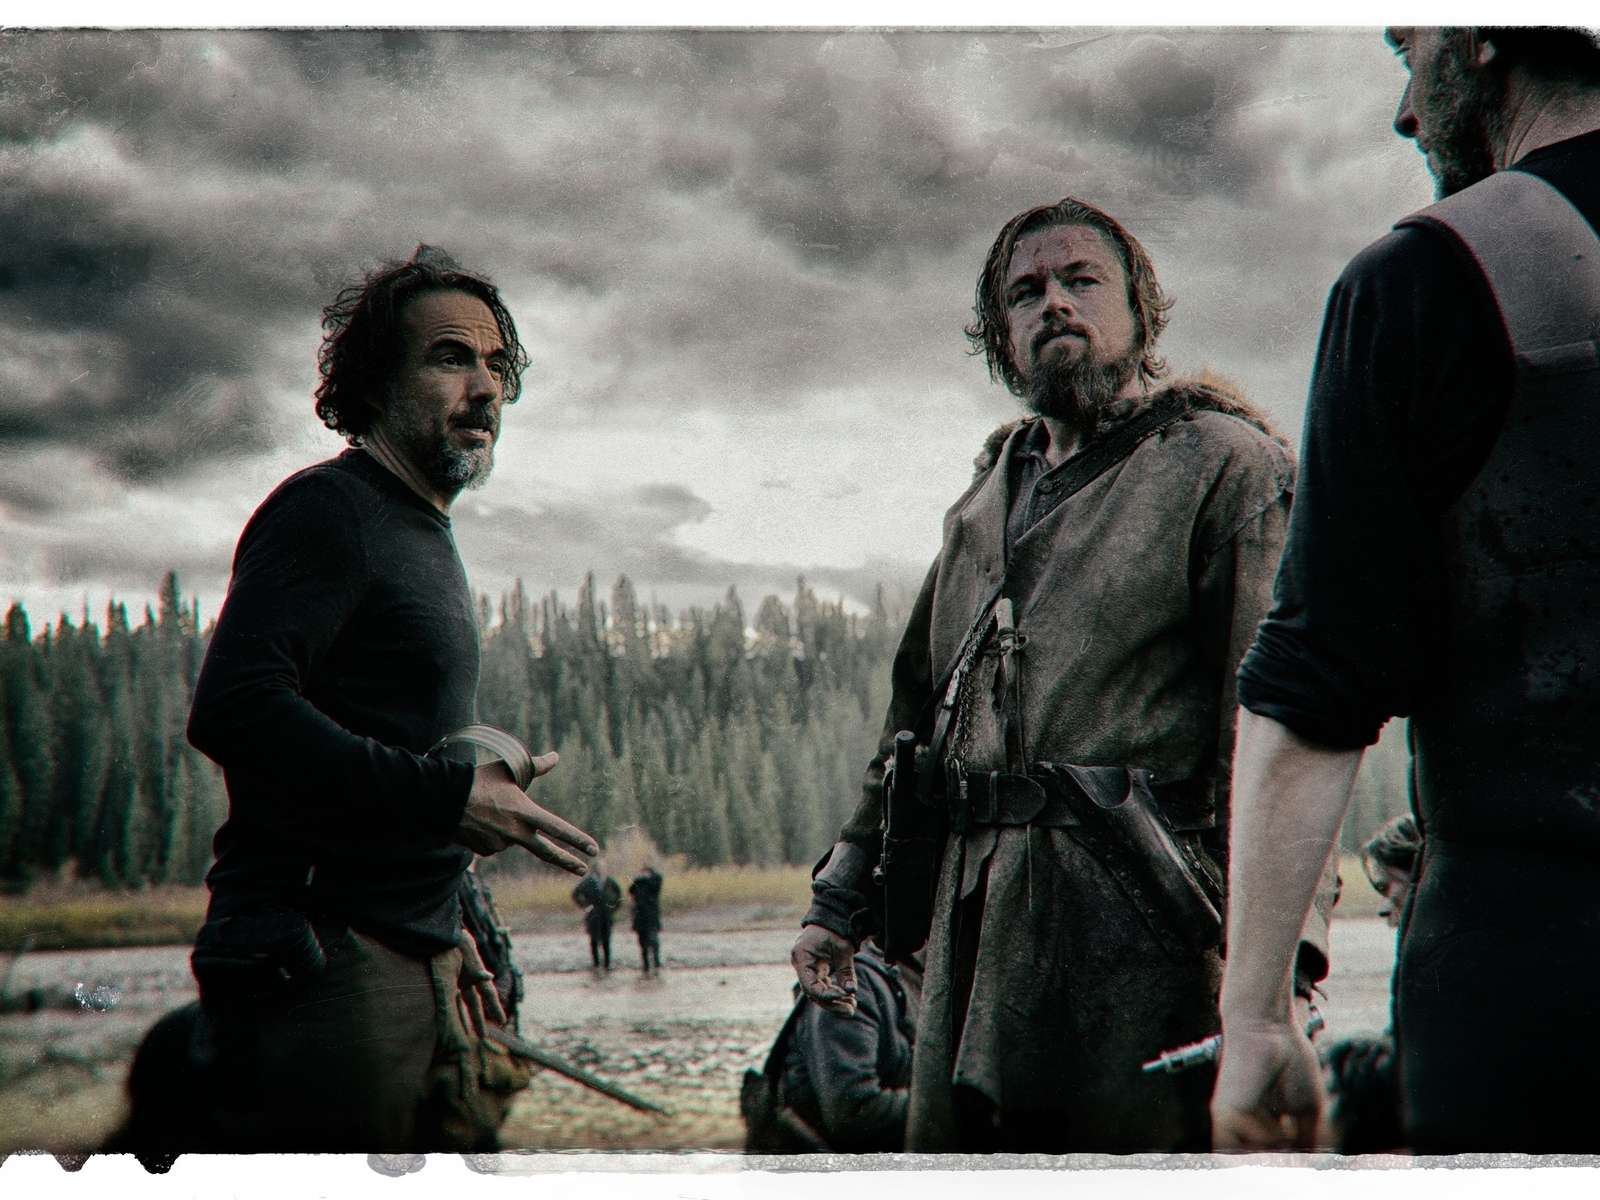 The Revenant Cast for 1600 x 1200 resolution